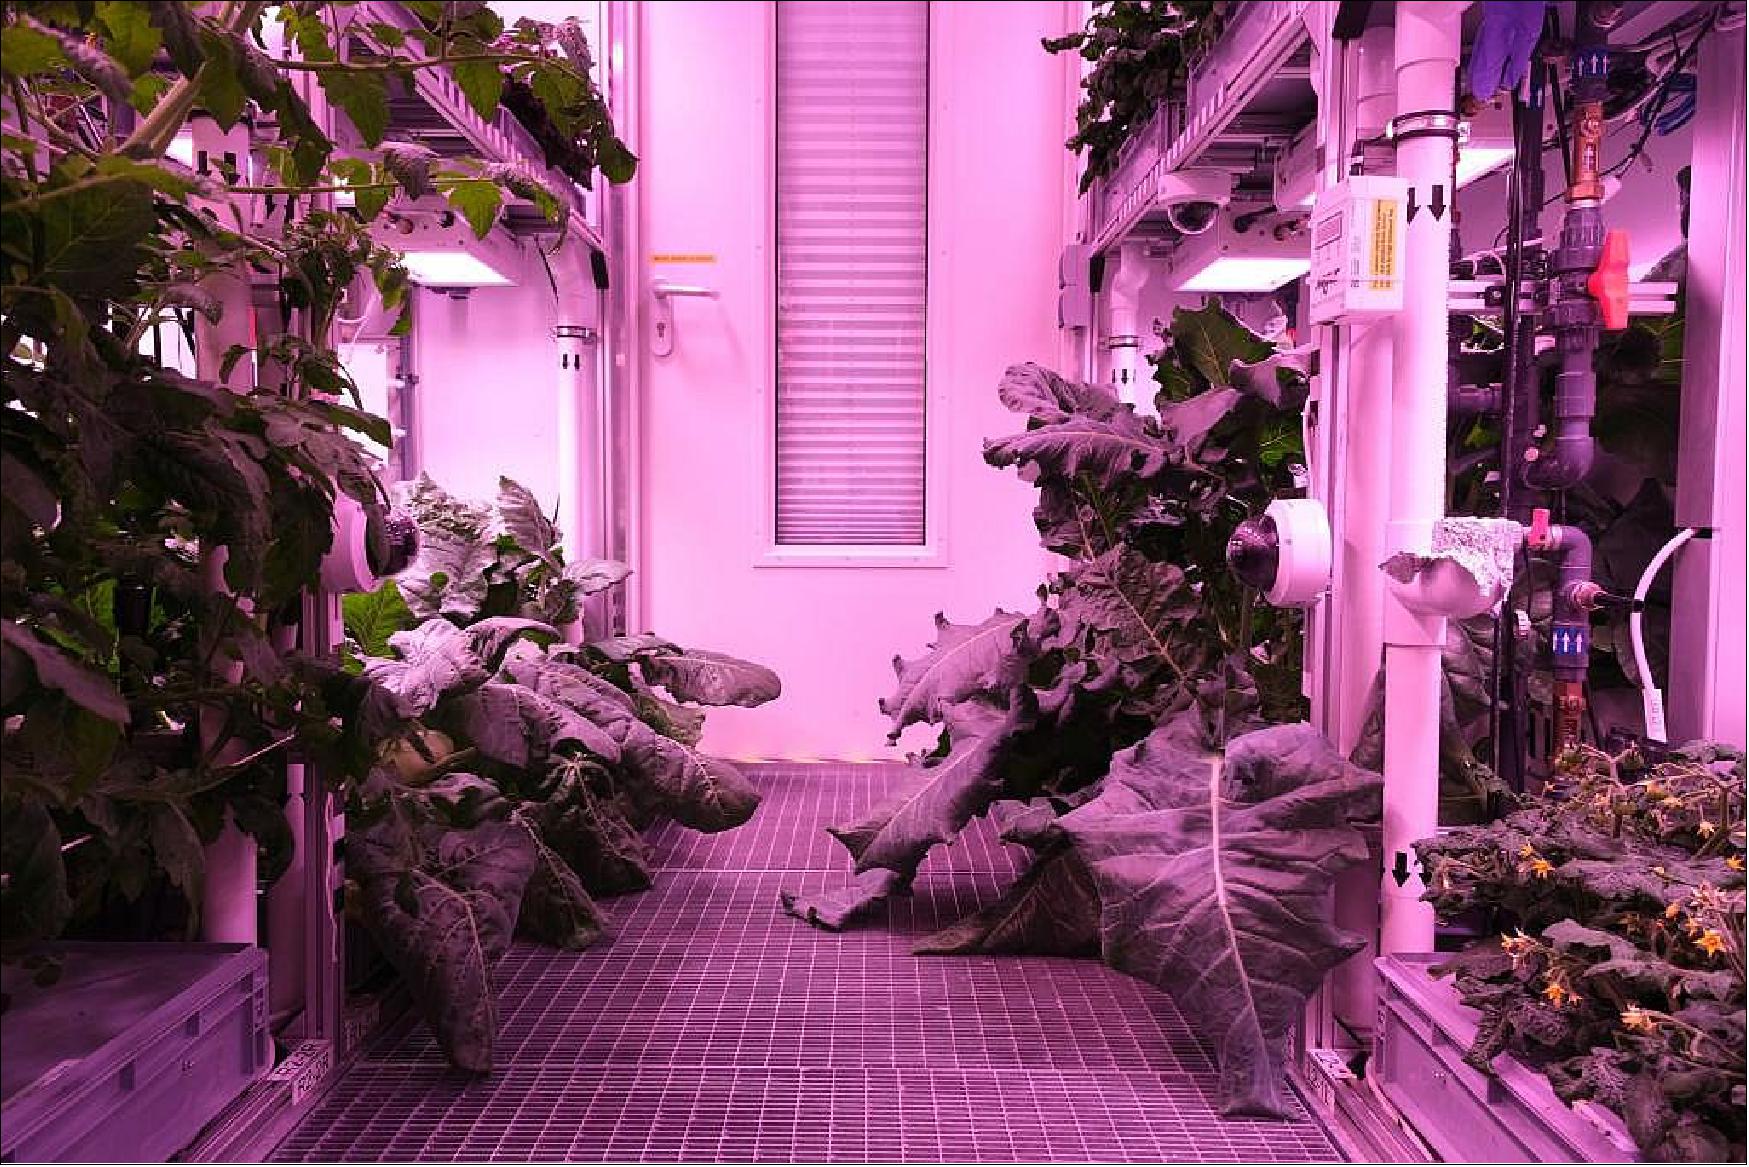 Figure 12: EDEN ISS Antarctic greenhouse. In addition to lettuces and herbs, kohlrabi (left) and broccoli (right) also thrive without soil under artificial light in the EDEN ISS Antarctic greenhouse (image credit: DLR / NASA / Bunchek)